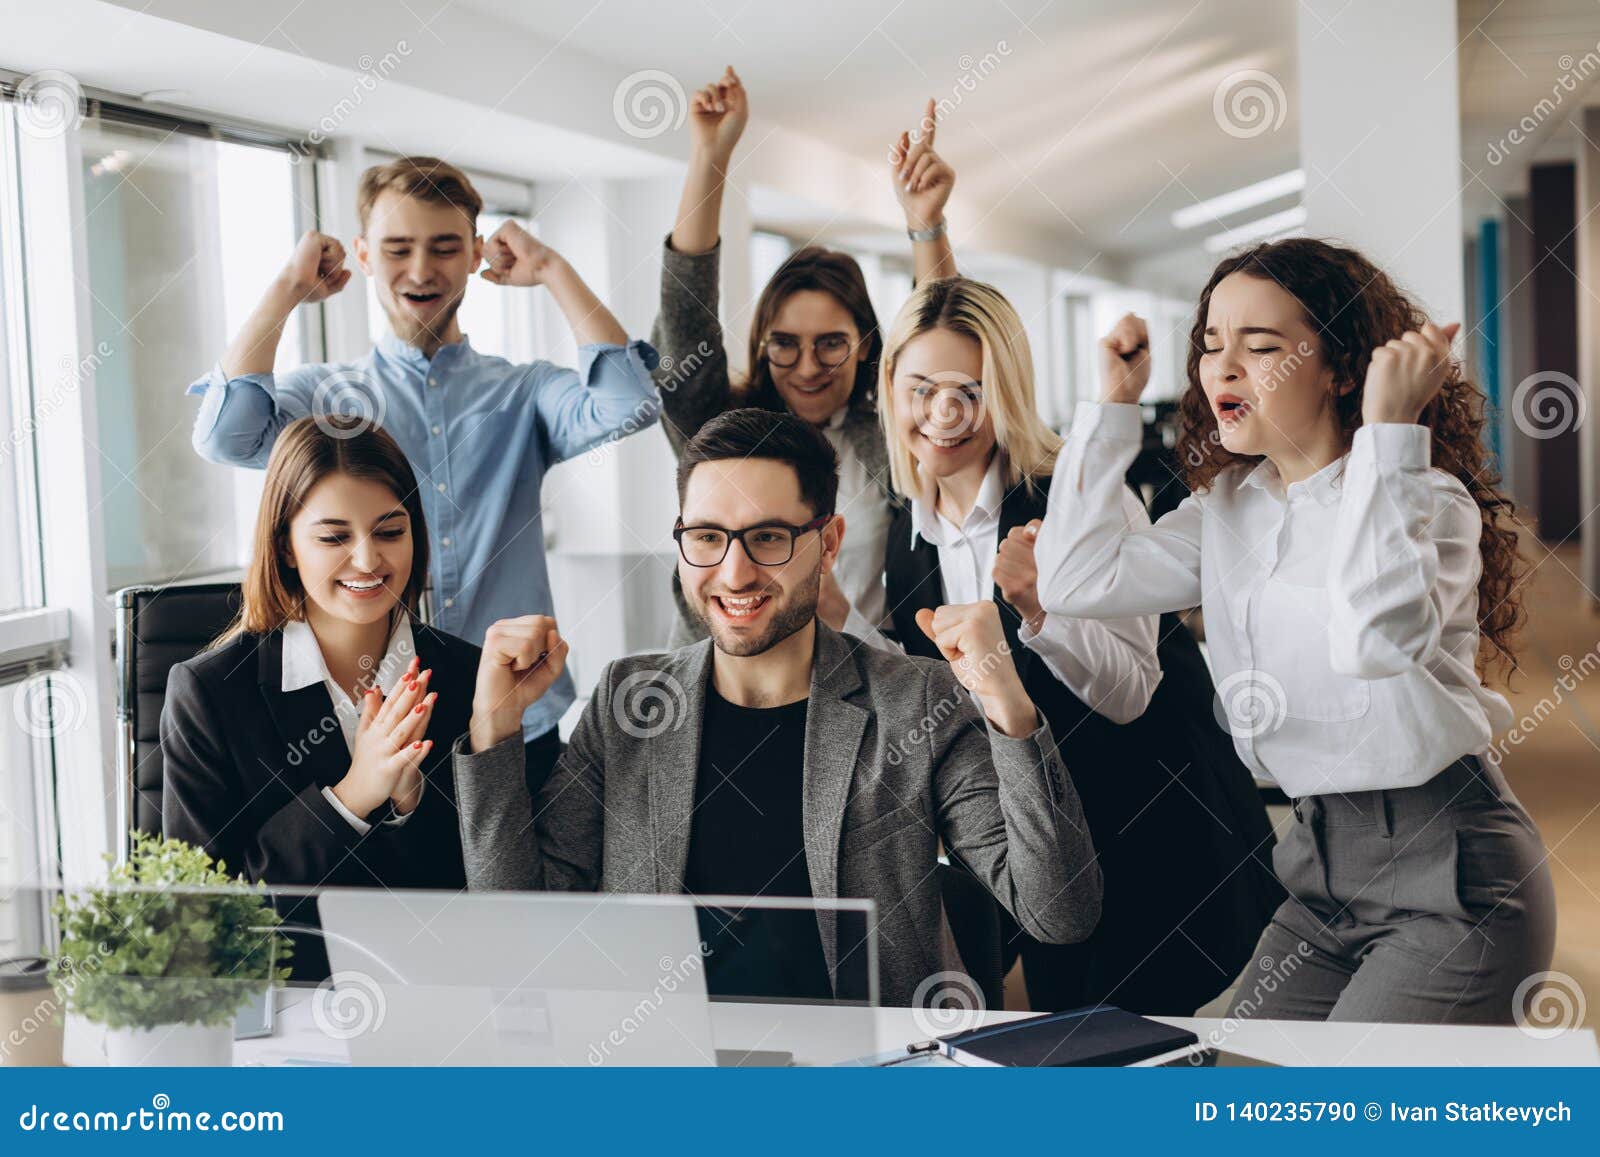 portrait of very happy successful expressive gesturing business team at office